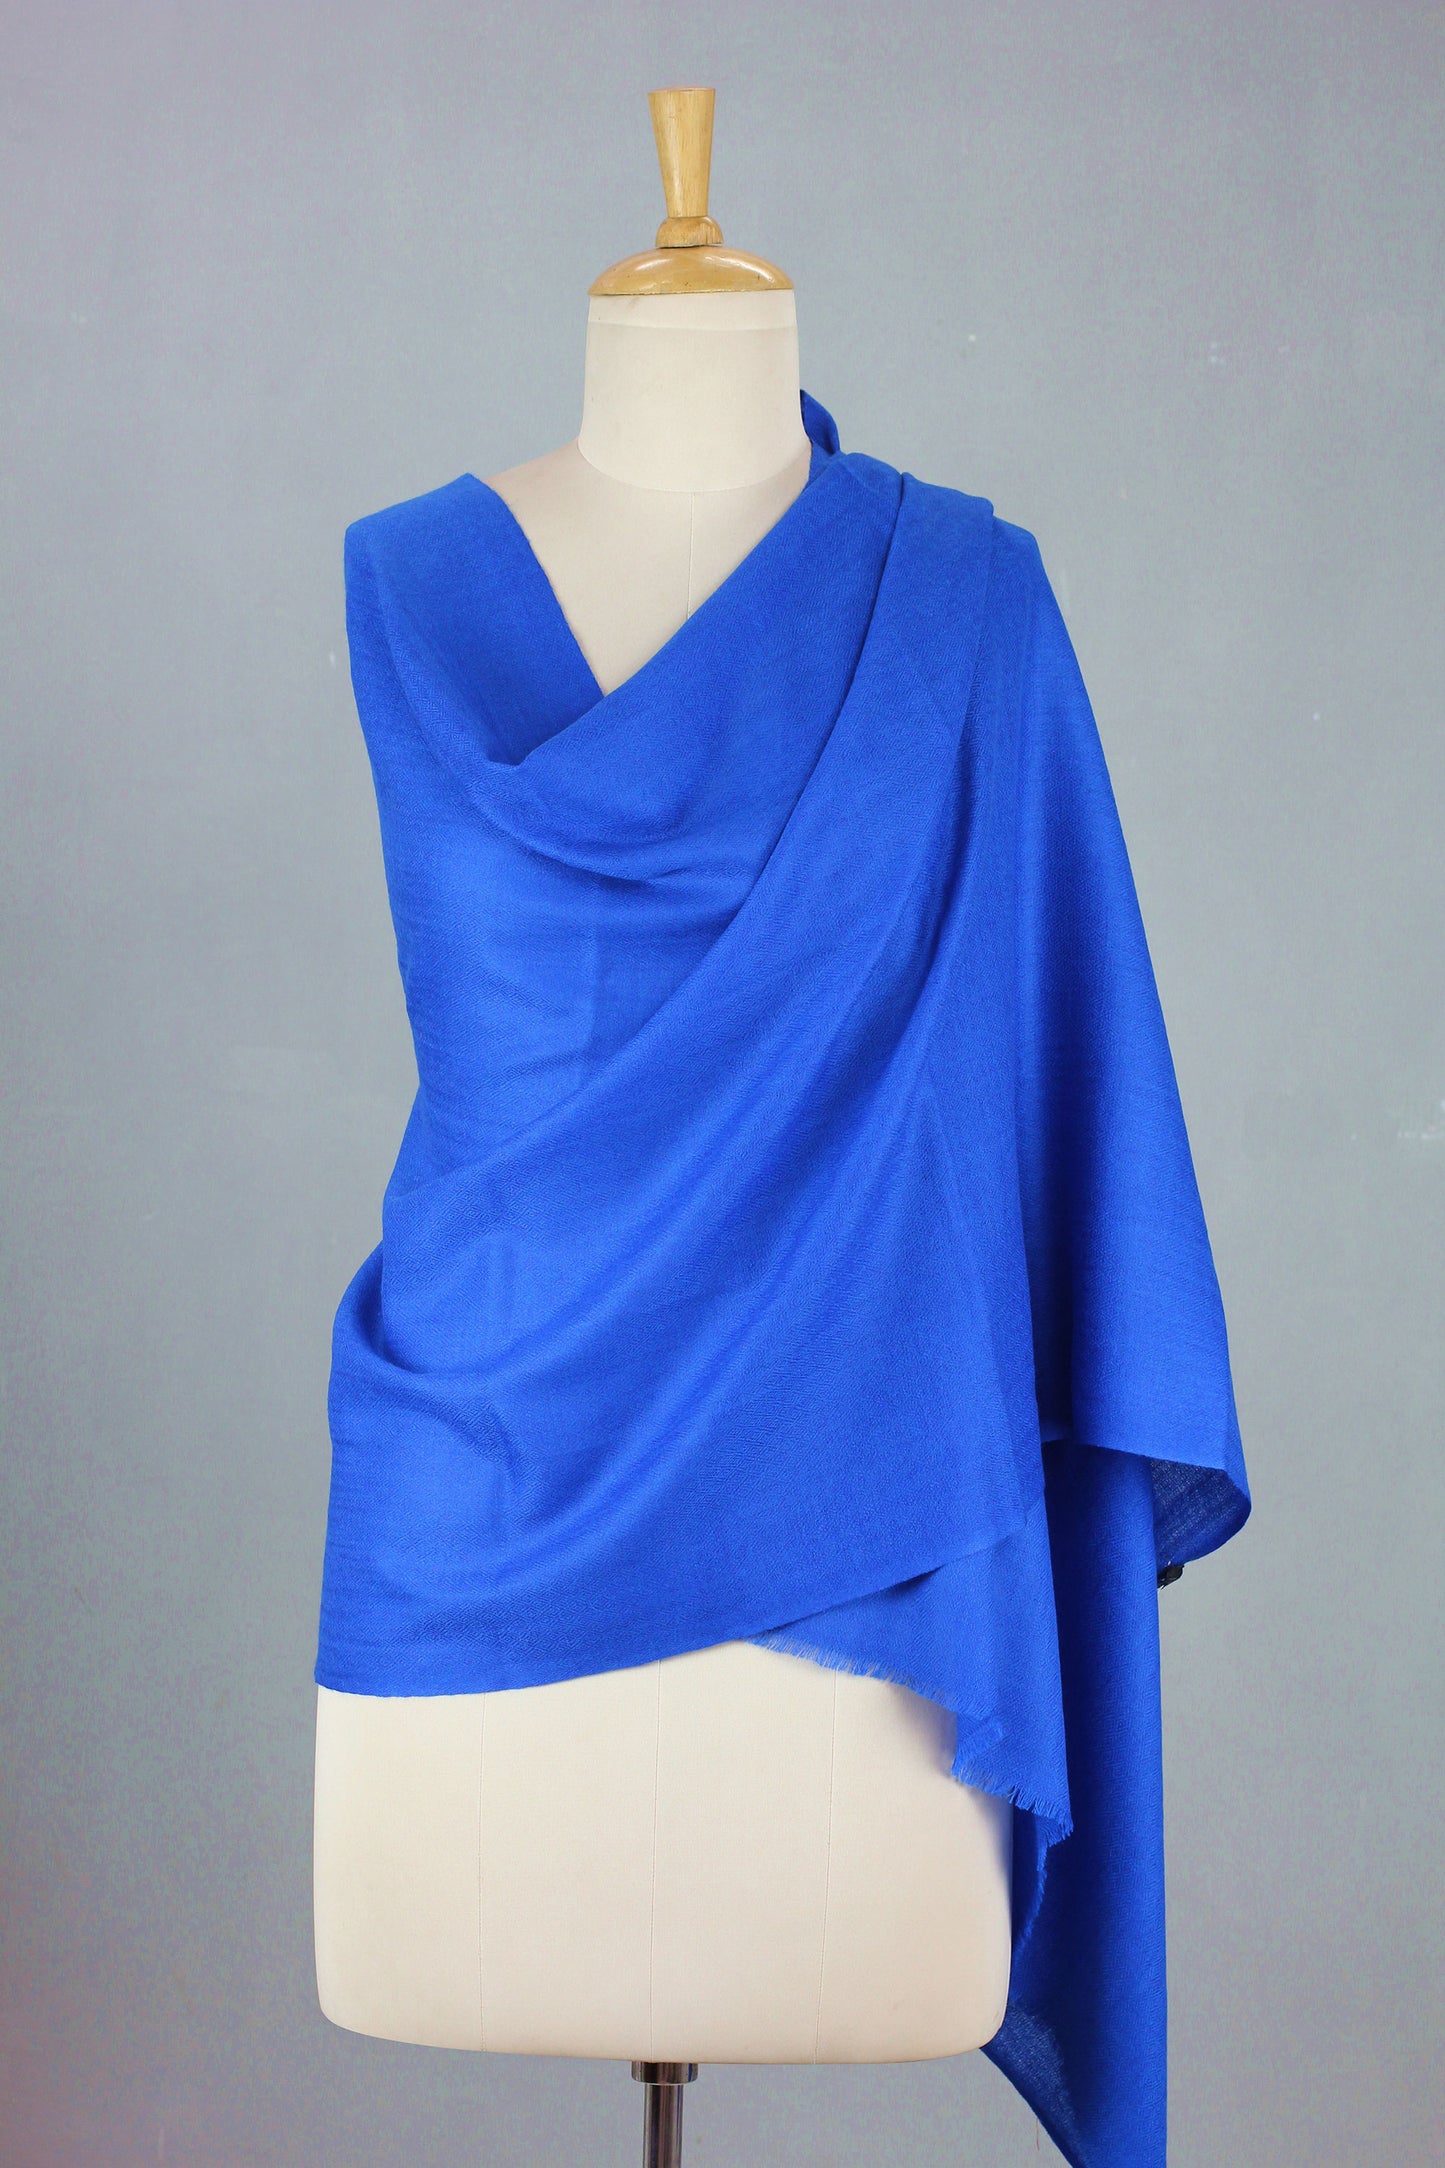 Kashmiri Diamonds in Blue Royal Blue Hand Loomed All Wool Shawl Made in India